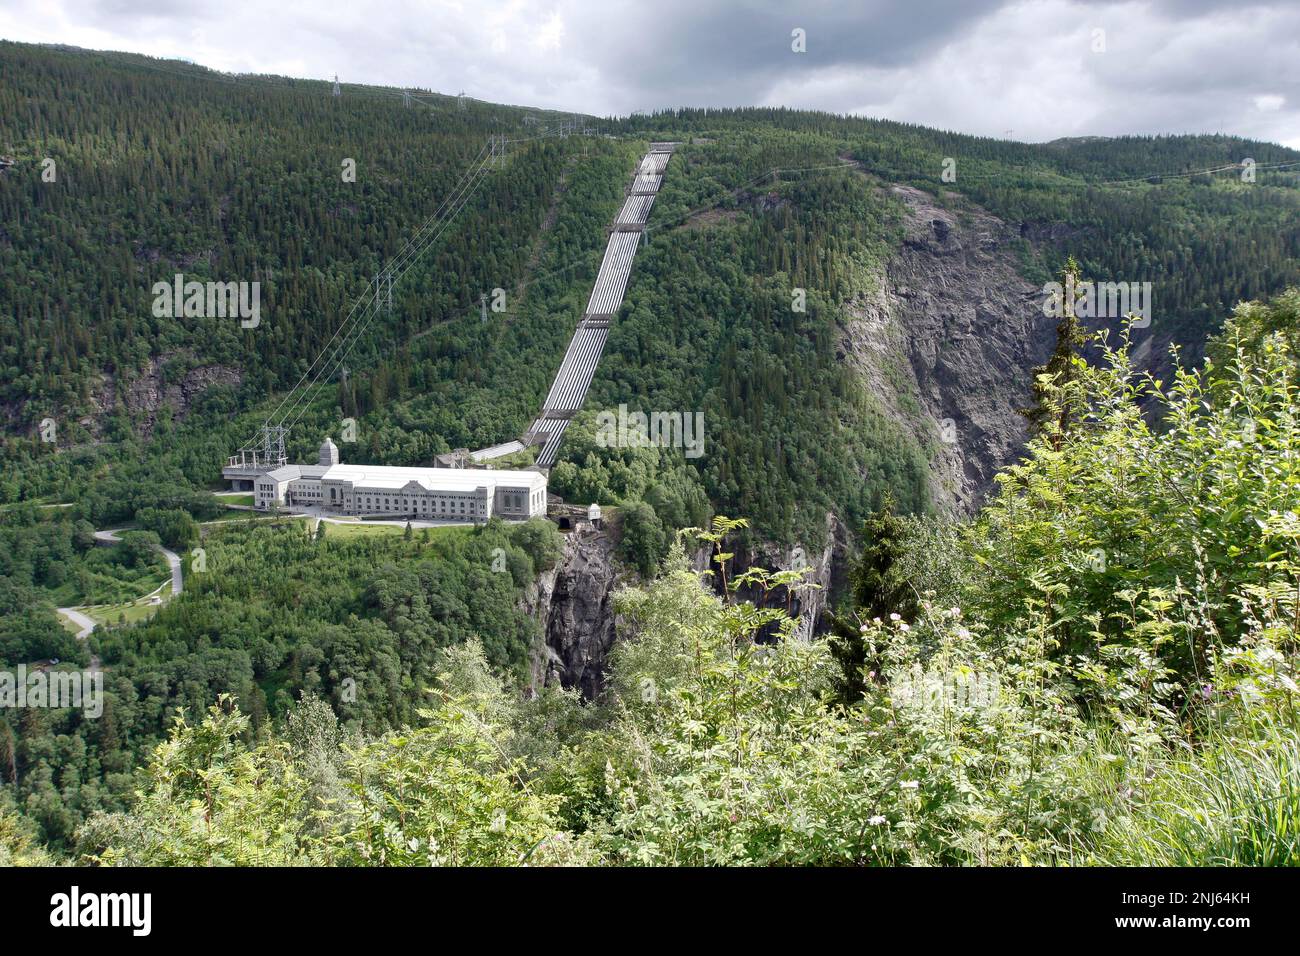 RJUKAN, NORWAY ON JULY 07, 2010. Vemork Hydroelectric Power Plant. Resistance fighters sabotage 1943, Gunnerside. Editorial use. Stock Photo